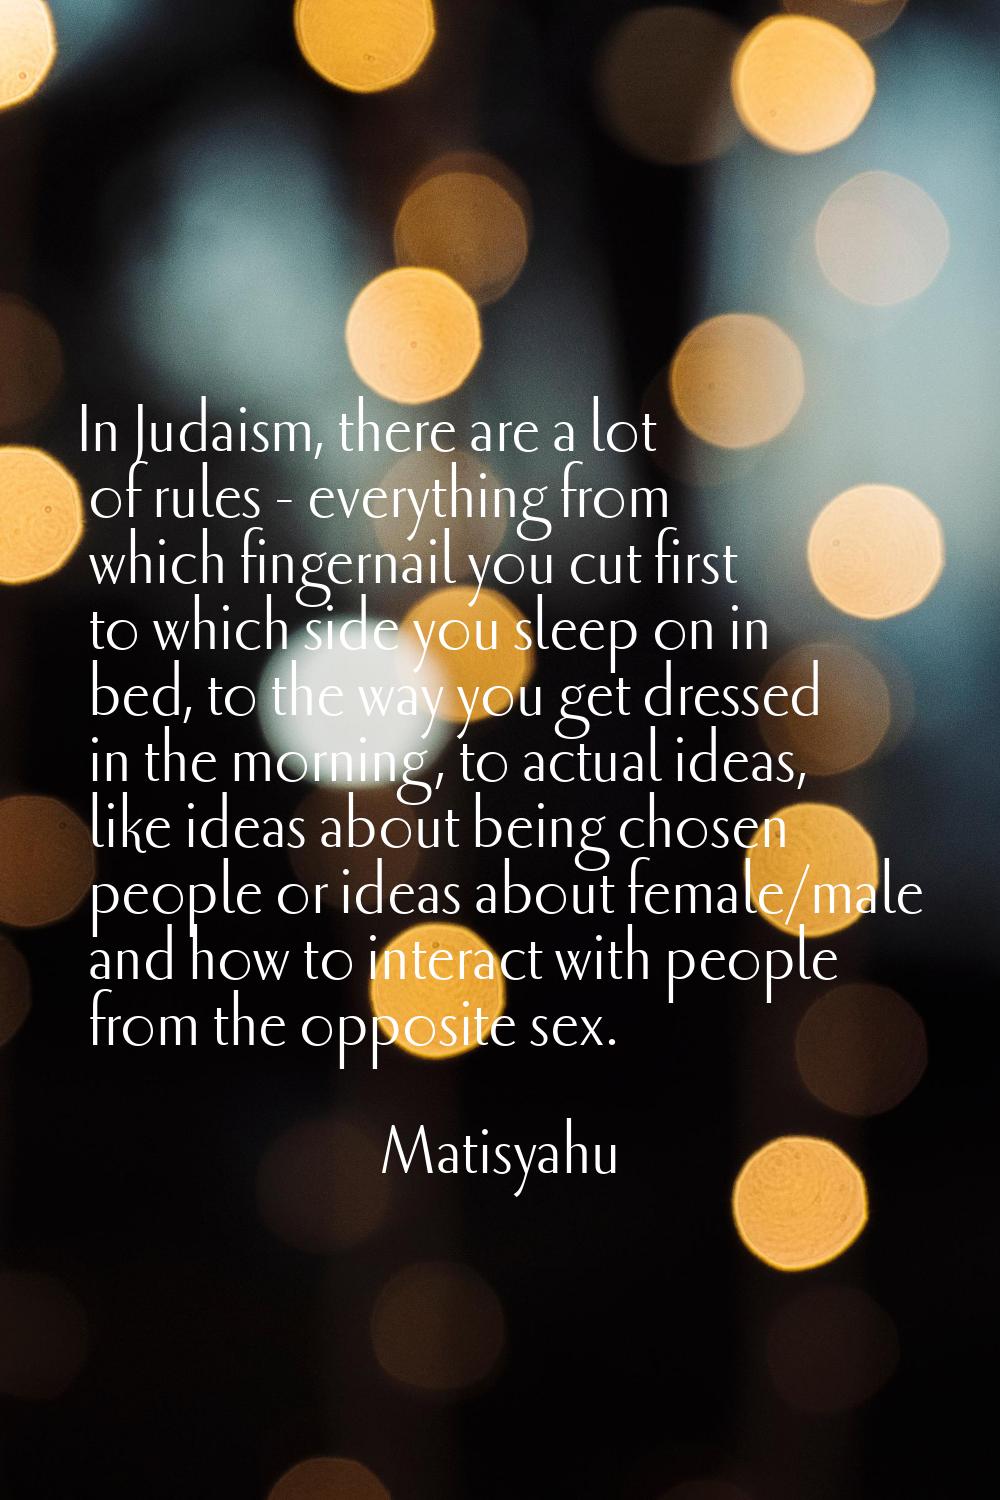 In Judaism, there are a lot of rules - everything from which fingernail you cut first to which side